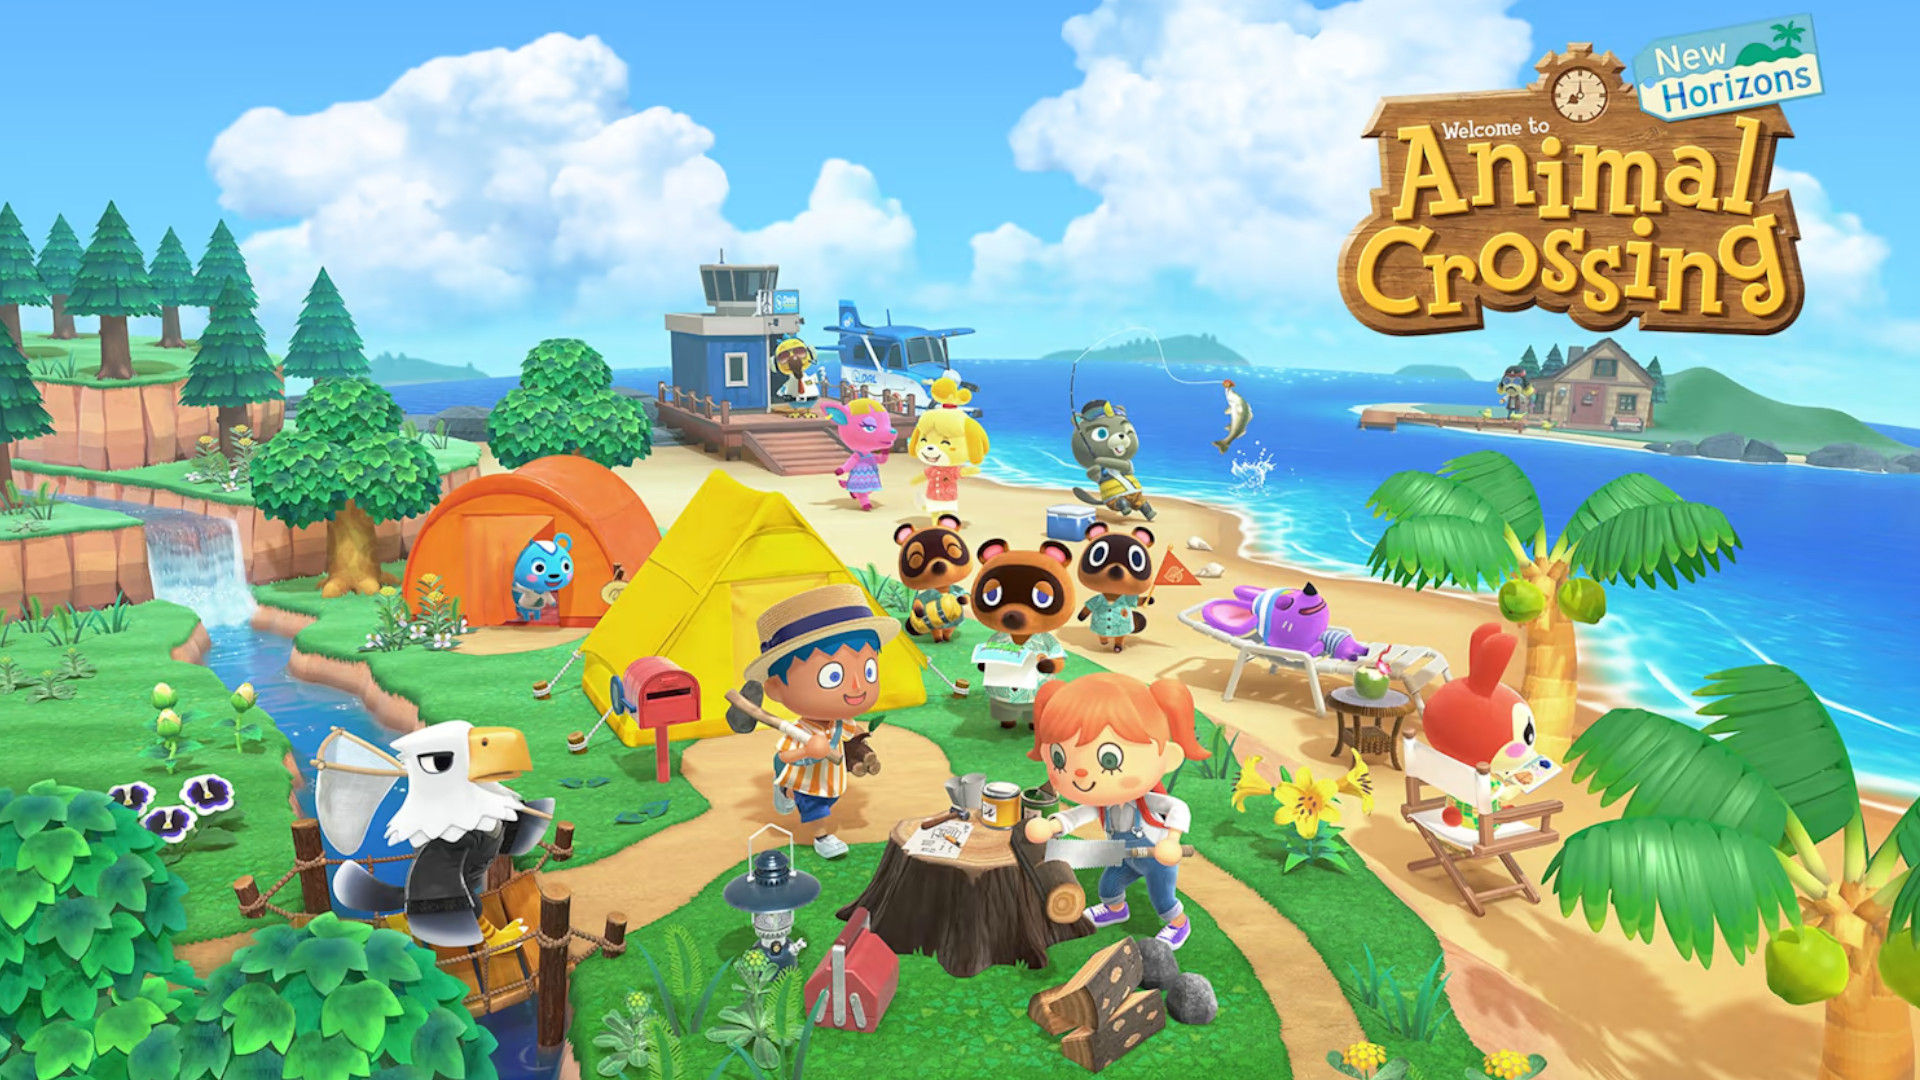 Animal Crossing cover art, one of the more relaxing fishing games